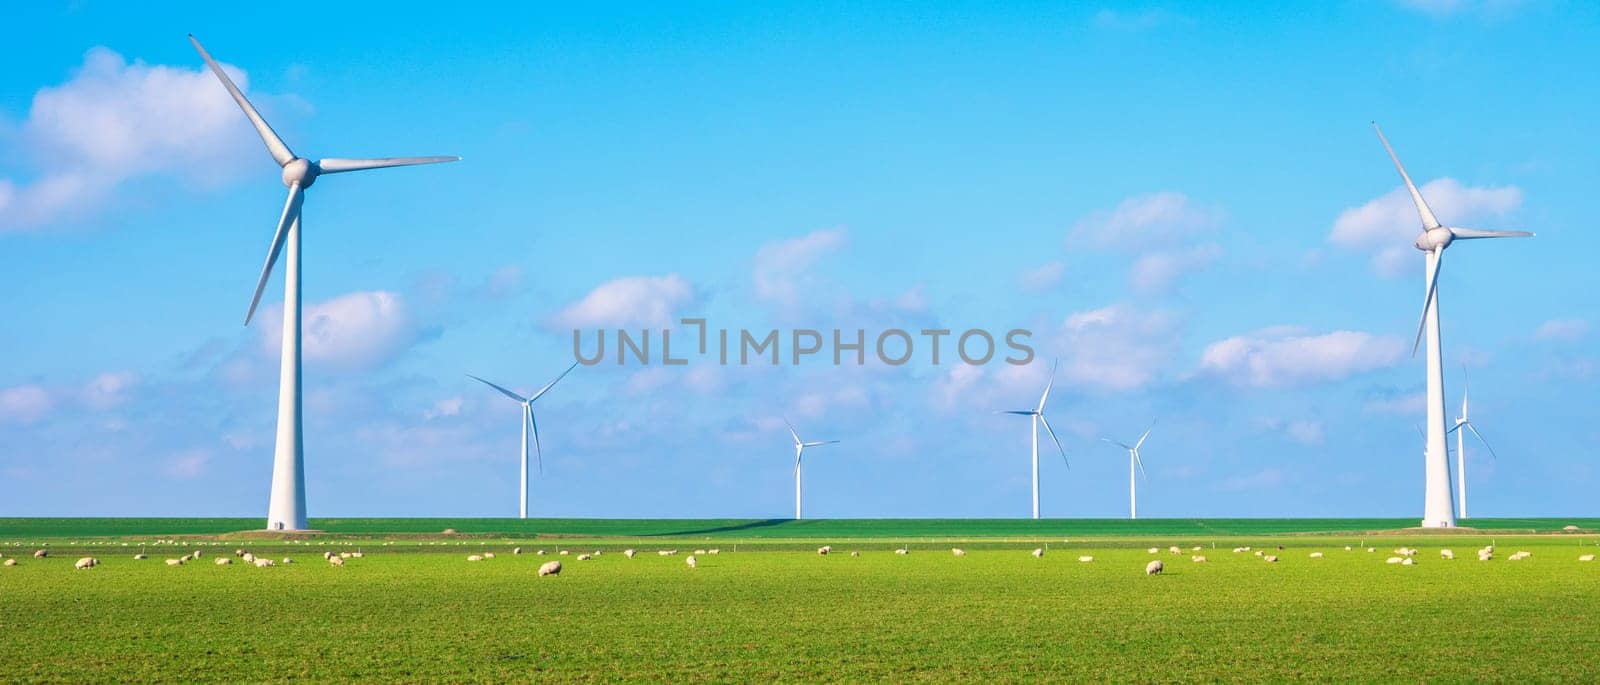 Windmill park on land, energy transition windmill turbines generating green energy, windmills isolated at sea in the Netherlands.